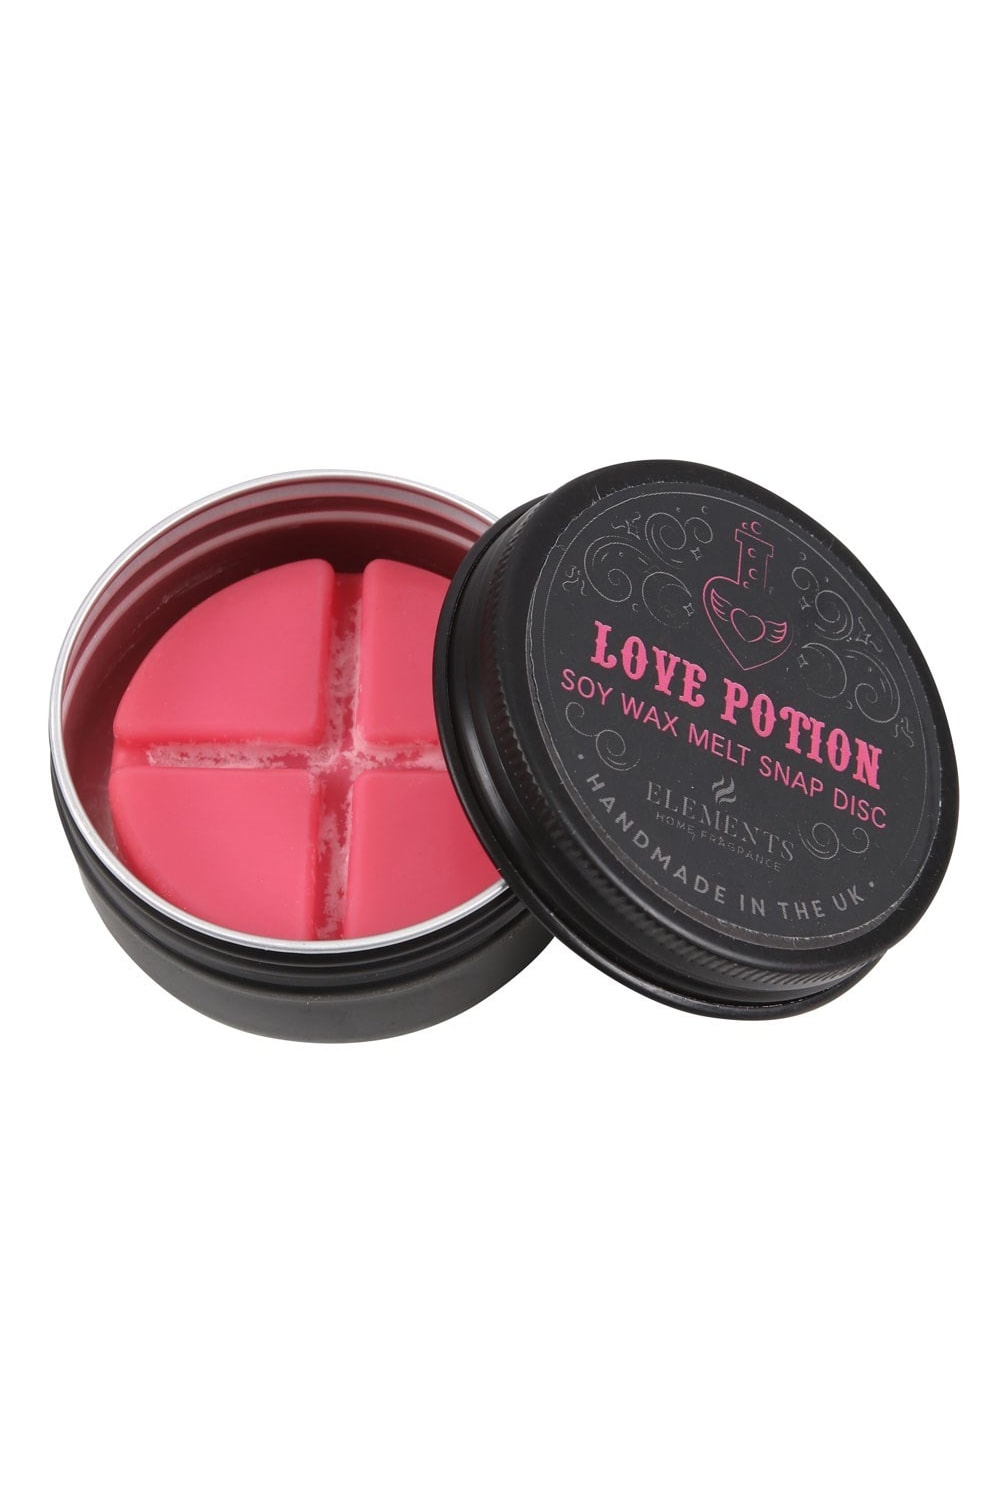 Home Fragrance Love Potion Disc Wax Melts - One Size